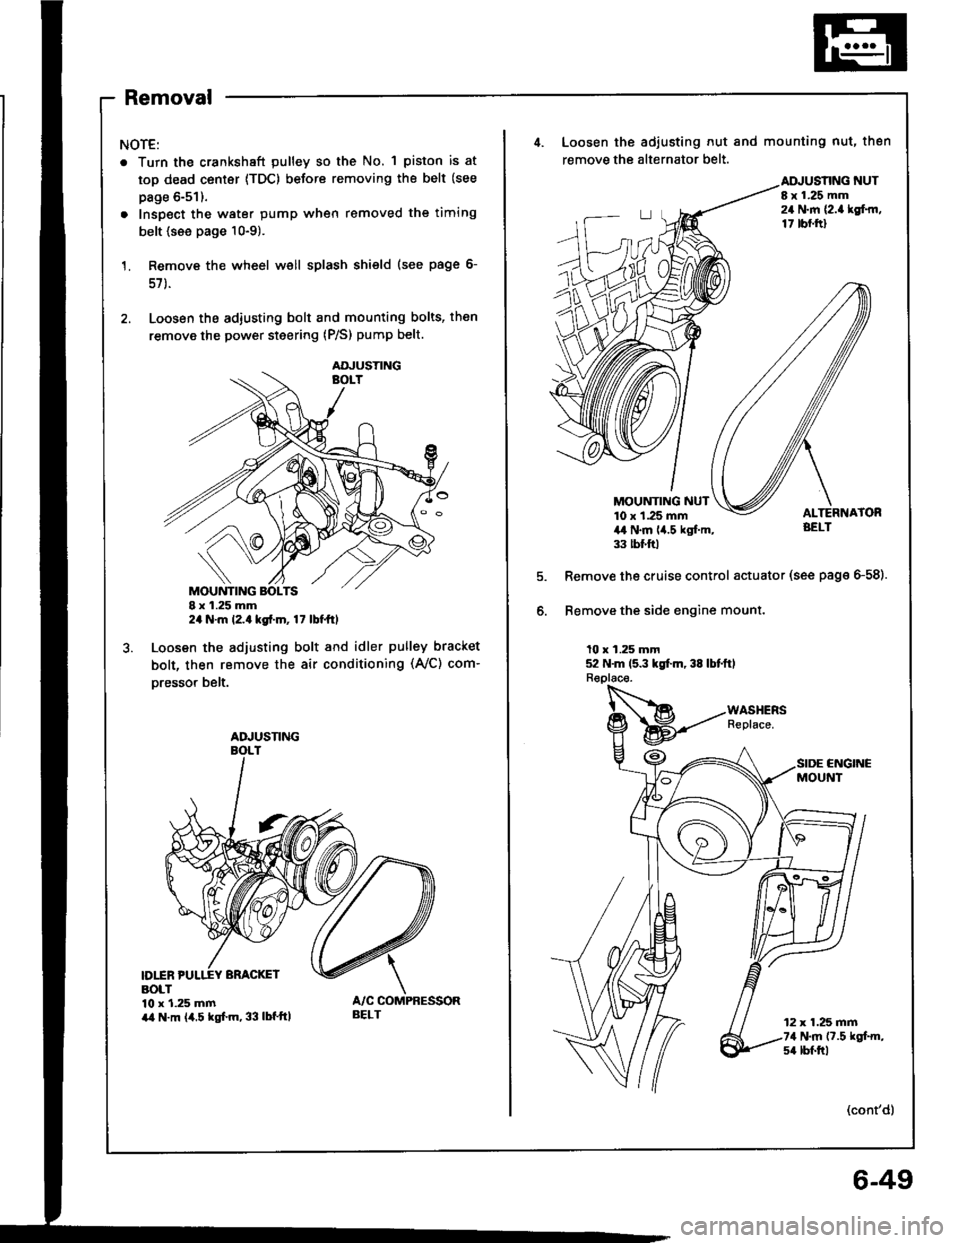 HONDA INTEGRA 1994 4.G Workshop Manual Removal
NOTE:
. Turn the crankshaft pulley so the No. 1 piston is at
top dead center {TDC) before removing the belt (see
page 6-51).
. Inspect the water pump when removed the timing
belt {see page 10-